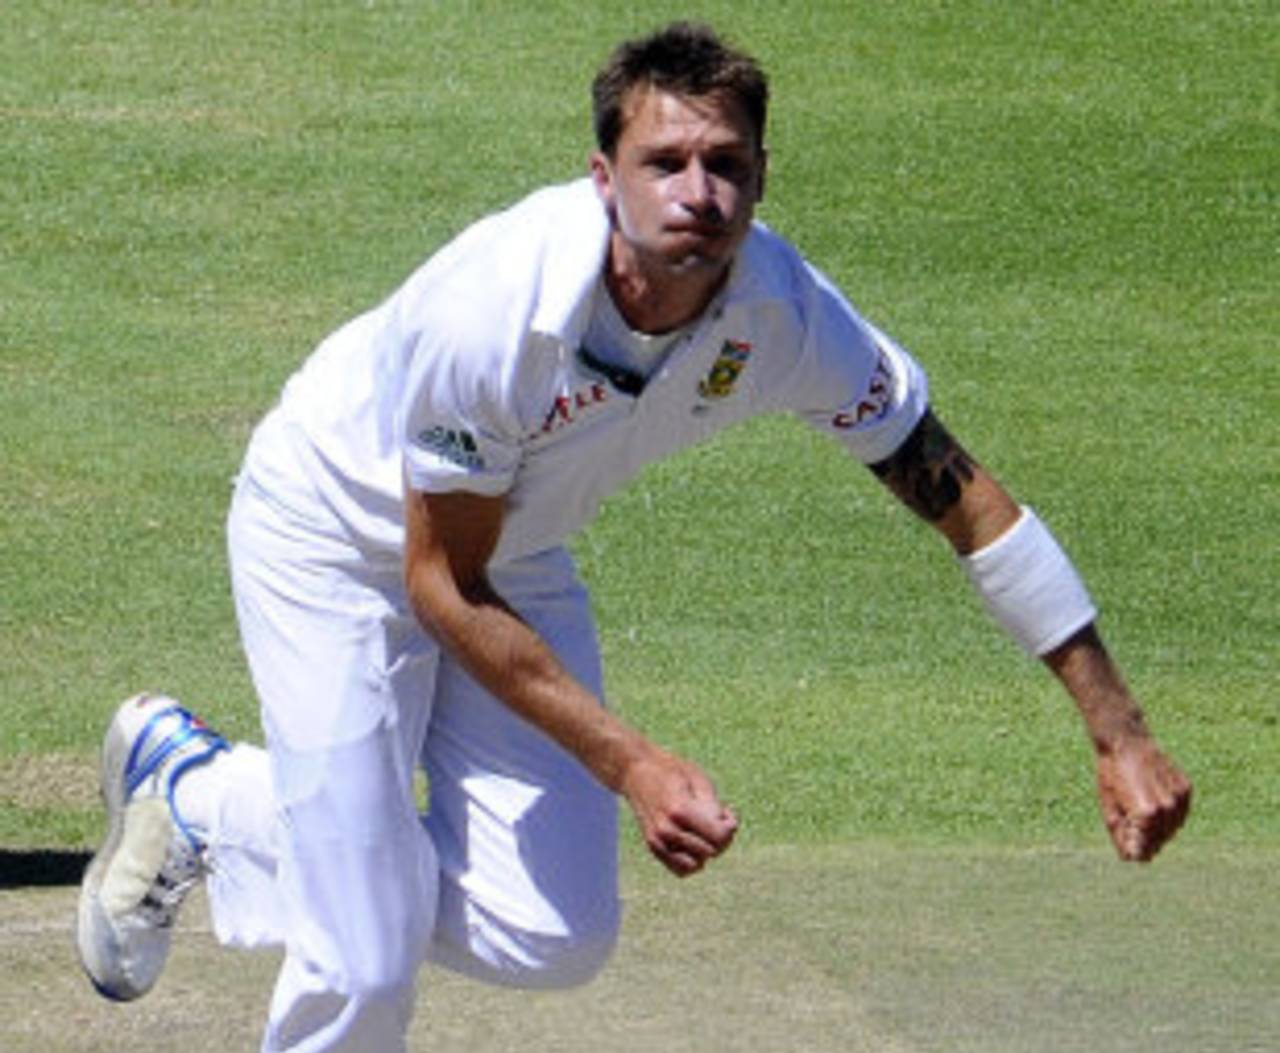 South Africa have the world's No. 1 bowler in Dale Steyn&nbsp;&nbsp;&bull;&nbsp;&nbsp;AFP